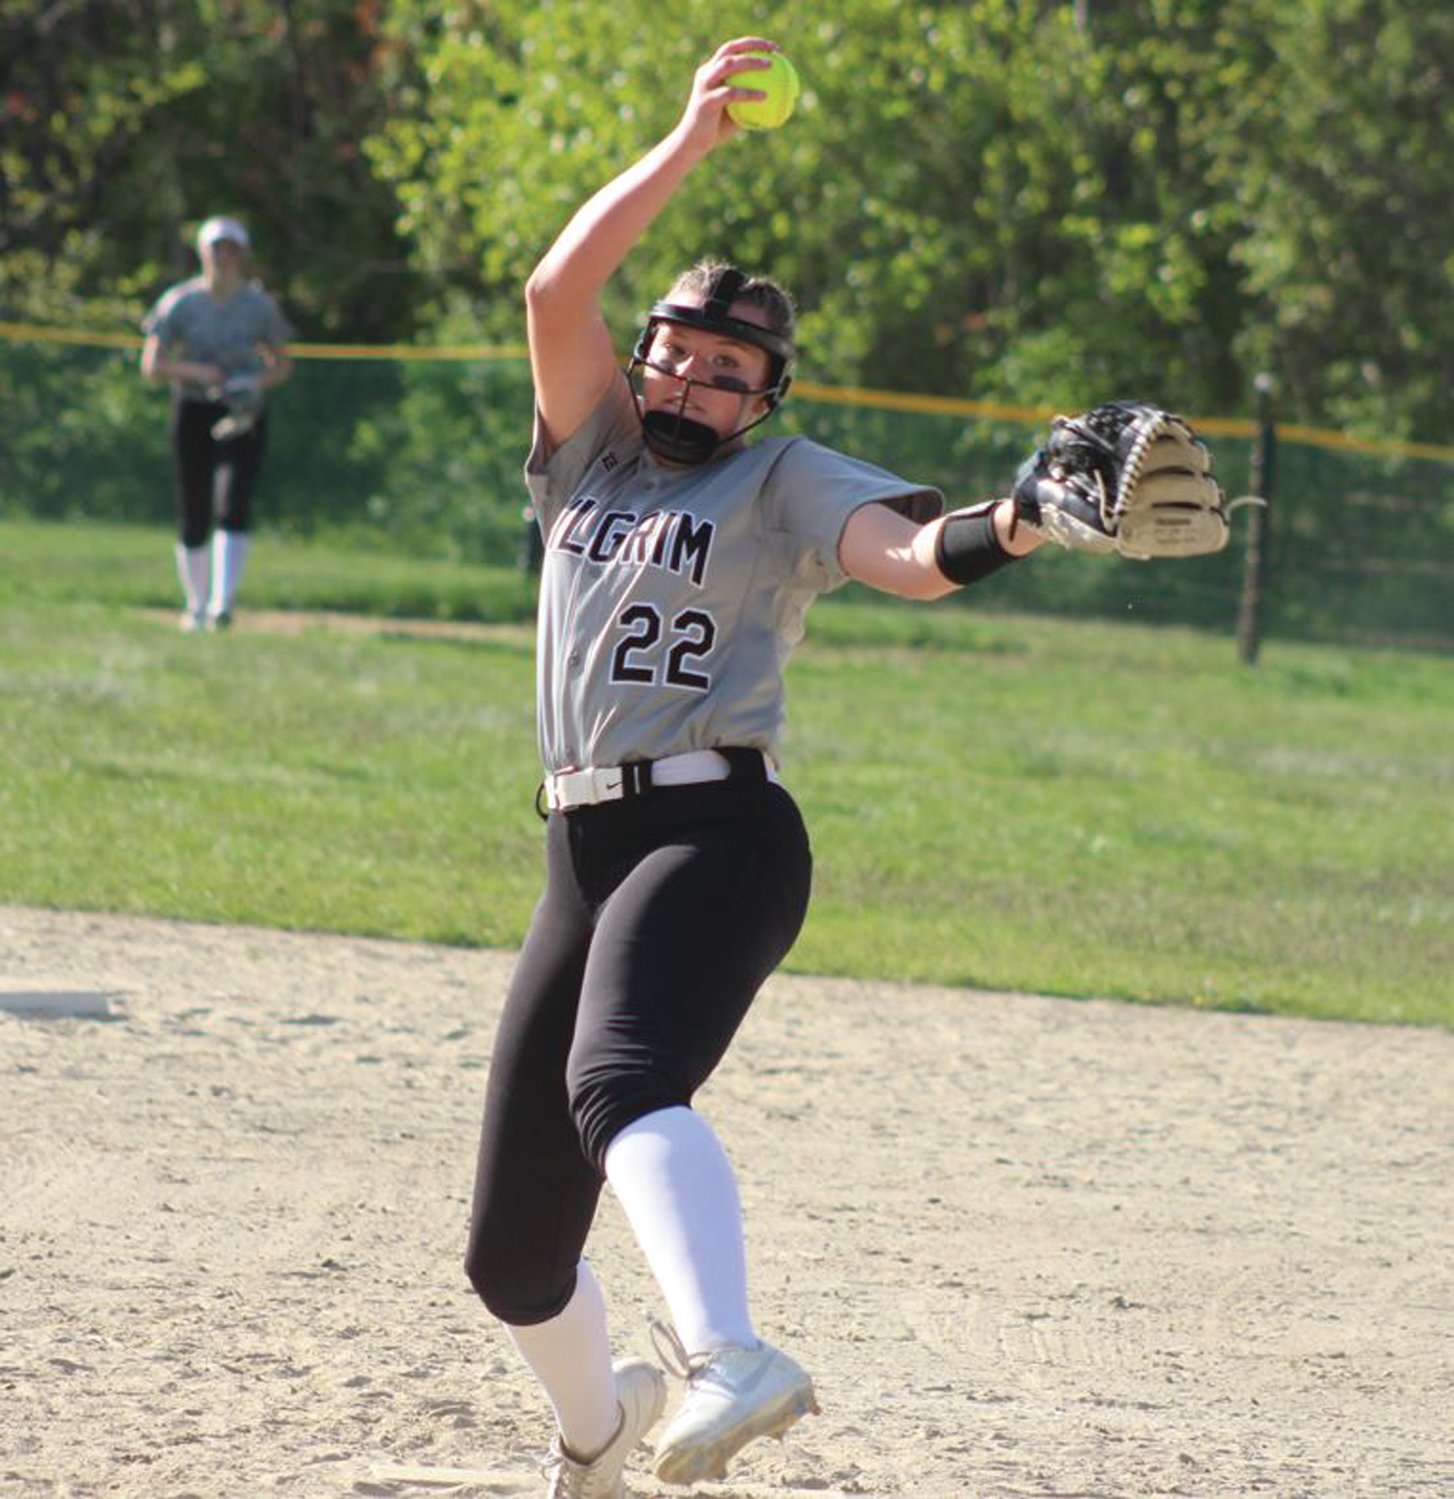 BIG WIN: Pilgrim starting pitcher Alyssa Twomey delivers a pitch against La Salle Academy last week and led the Pats to a big 10-2 win. Twomey also made an impact at the plate, hitting a two-run homer in the first inning to set the tone the rest of the way. (Photos by Alex Sponseller)